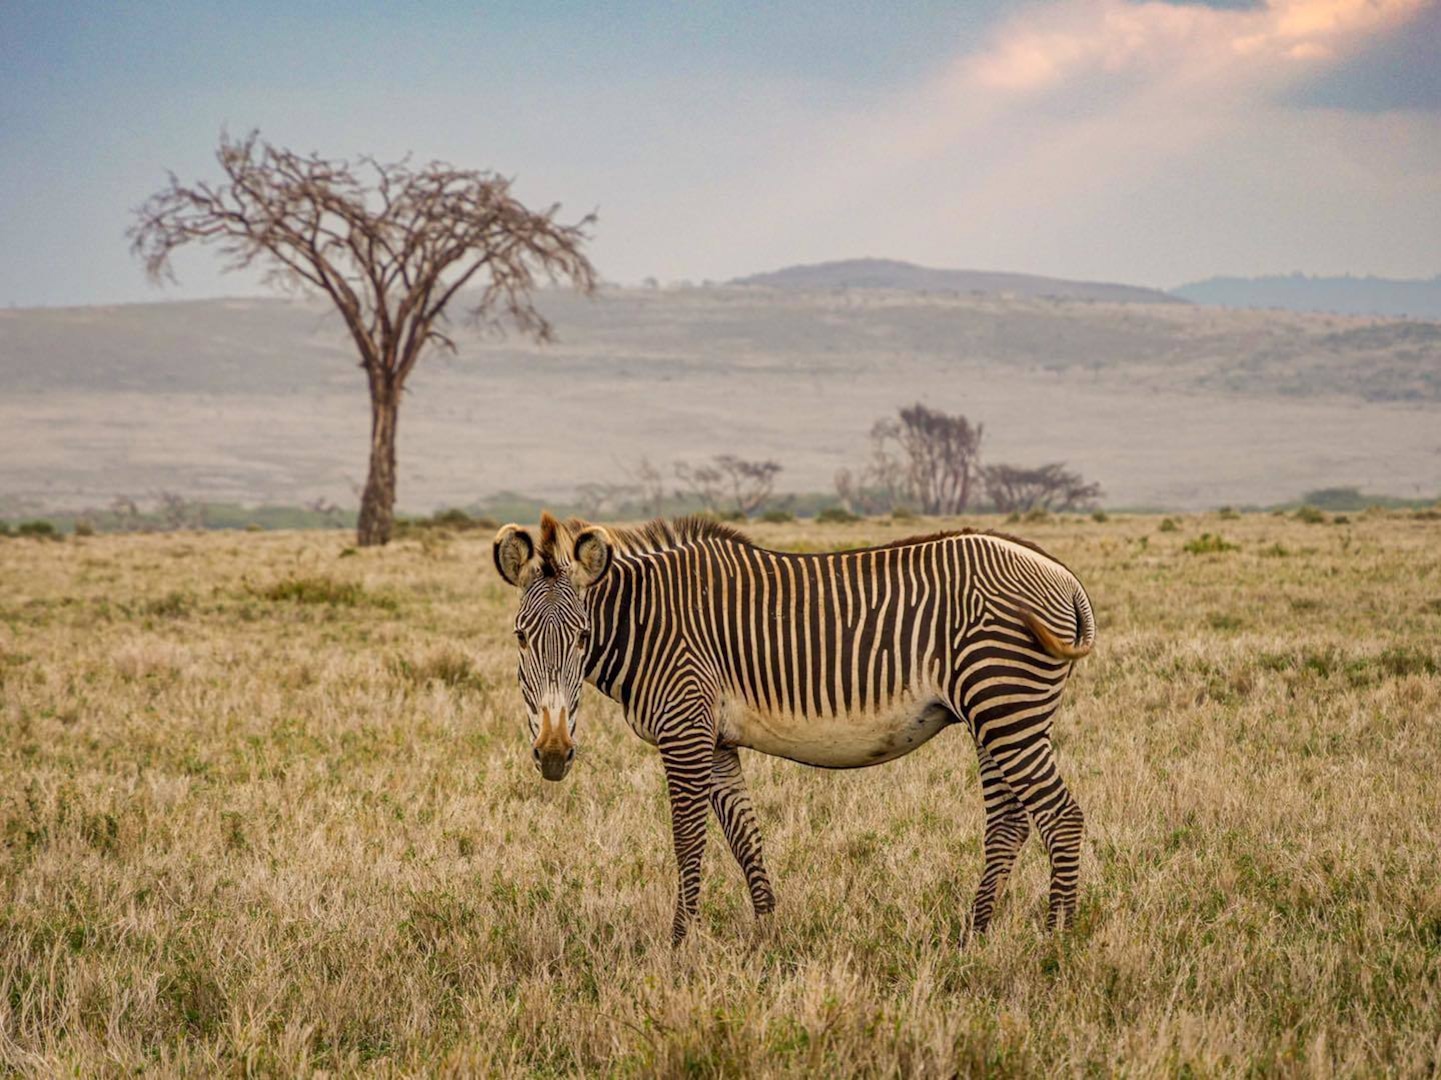 Zebras graze near the course of the For Rangers Ultramarathon Sept. 15, 2022, in Kenya, Africa. Senior Master Sgt. Jeff Delorey, the superintendent of health services with the 157th Medical Group, finished first out of 60 competitors during the 143-mile race.